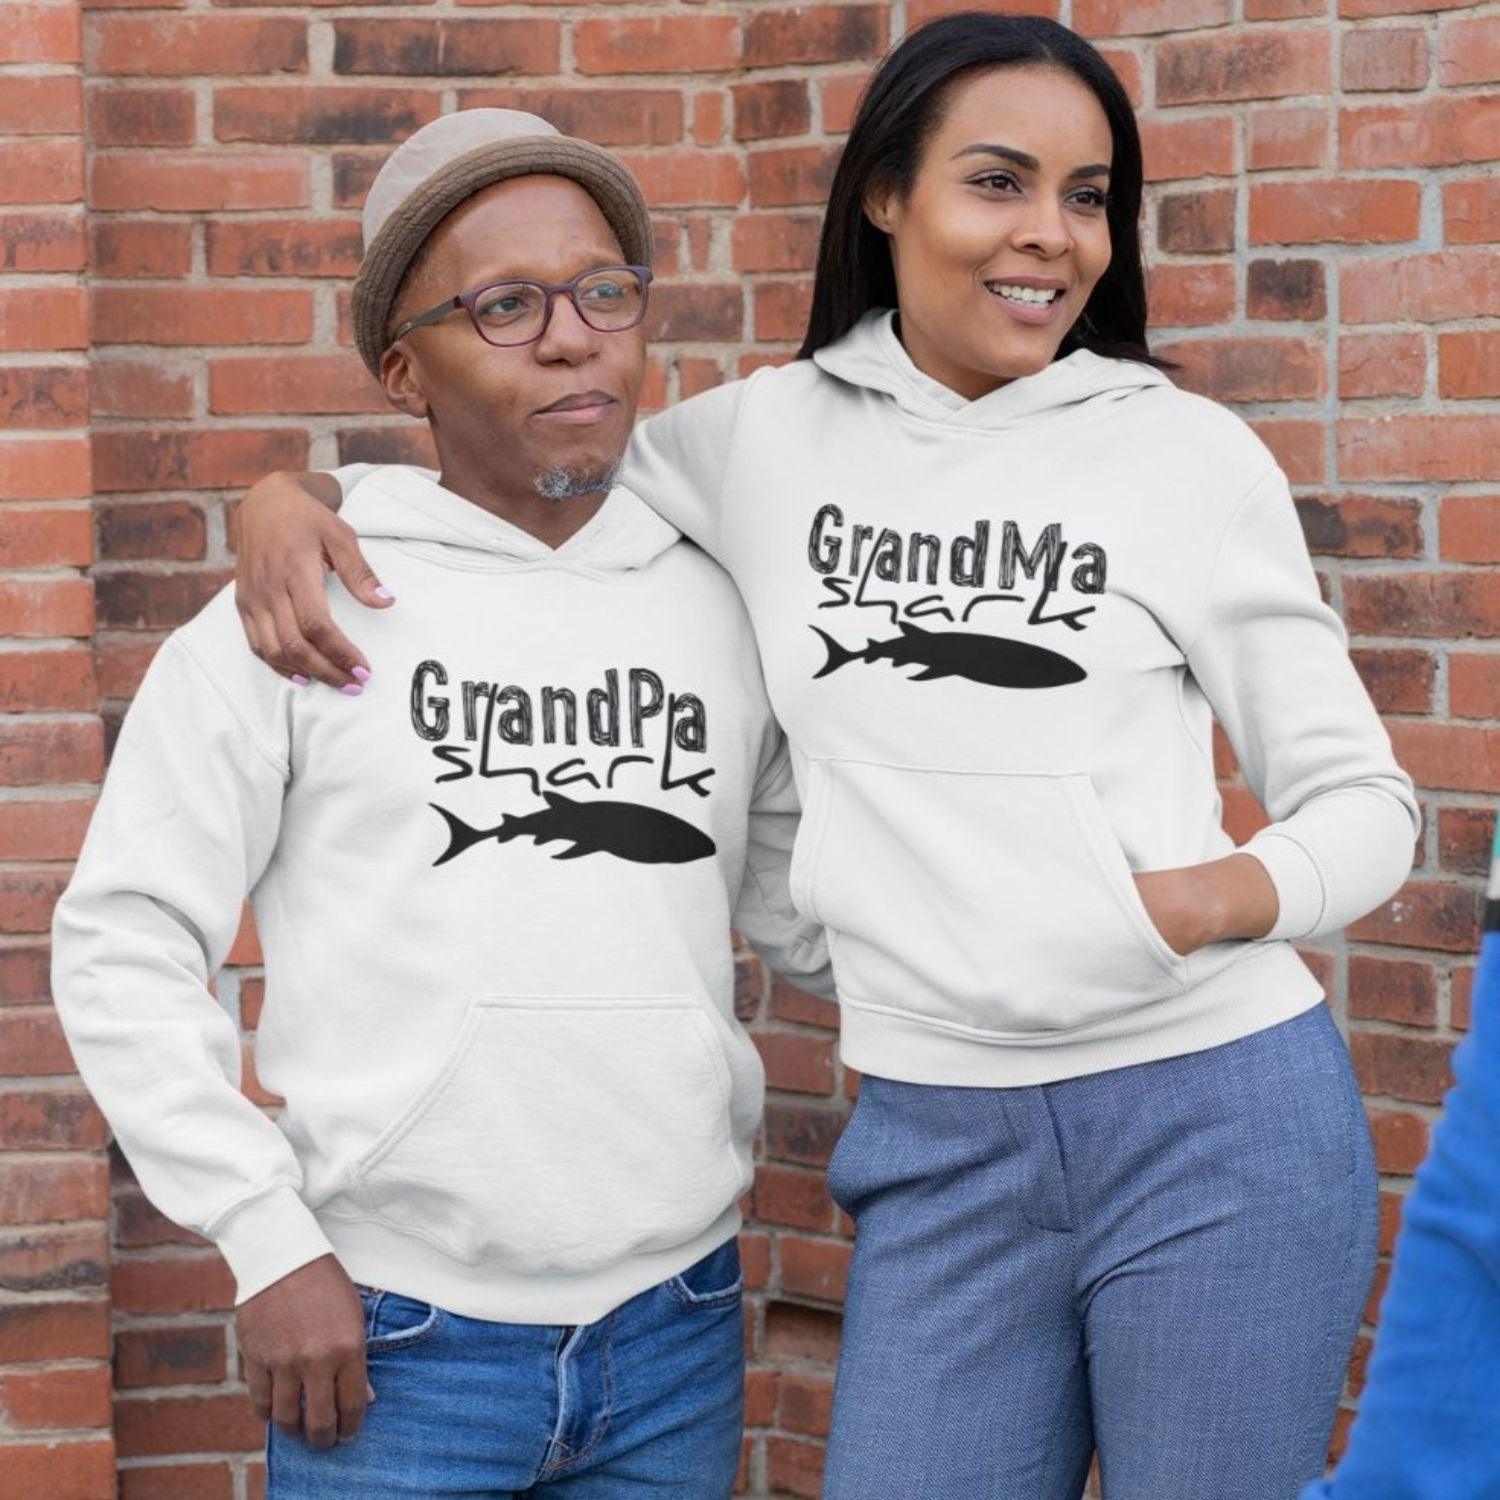 Grandparent Gifts: Matching Shark Outfits For Grandma & Grandpa's Birthday Party - 4Lovebirds